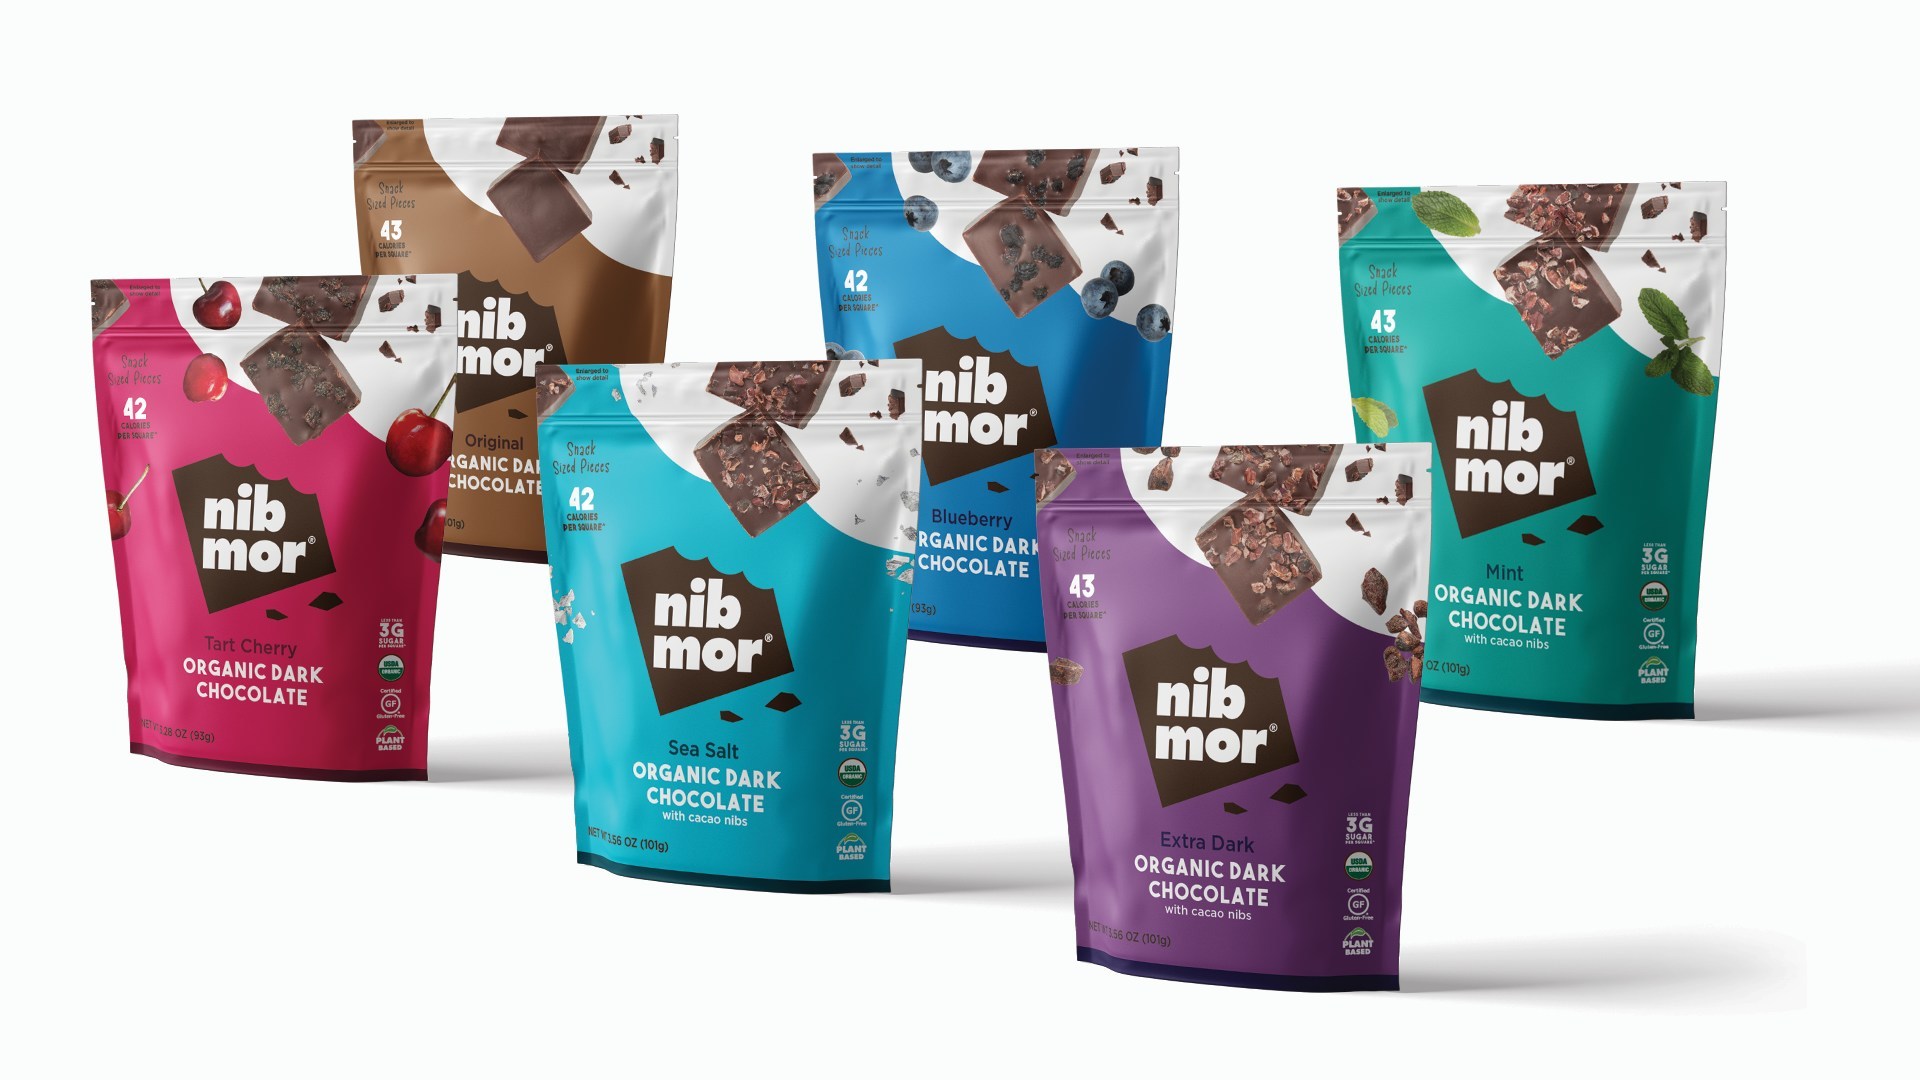 nib mor® Announces Product Rebrand Along with New Packaging